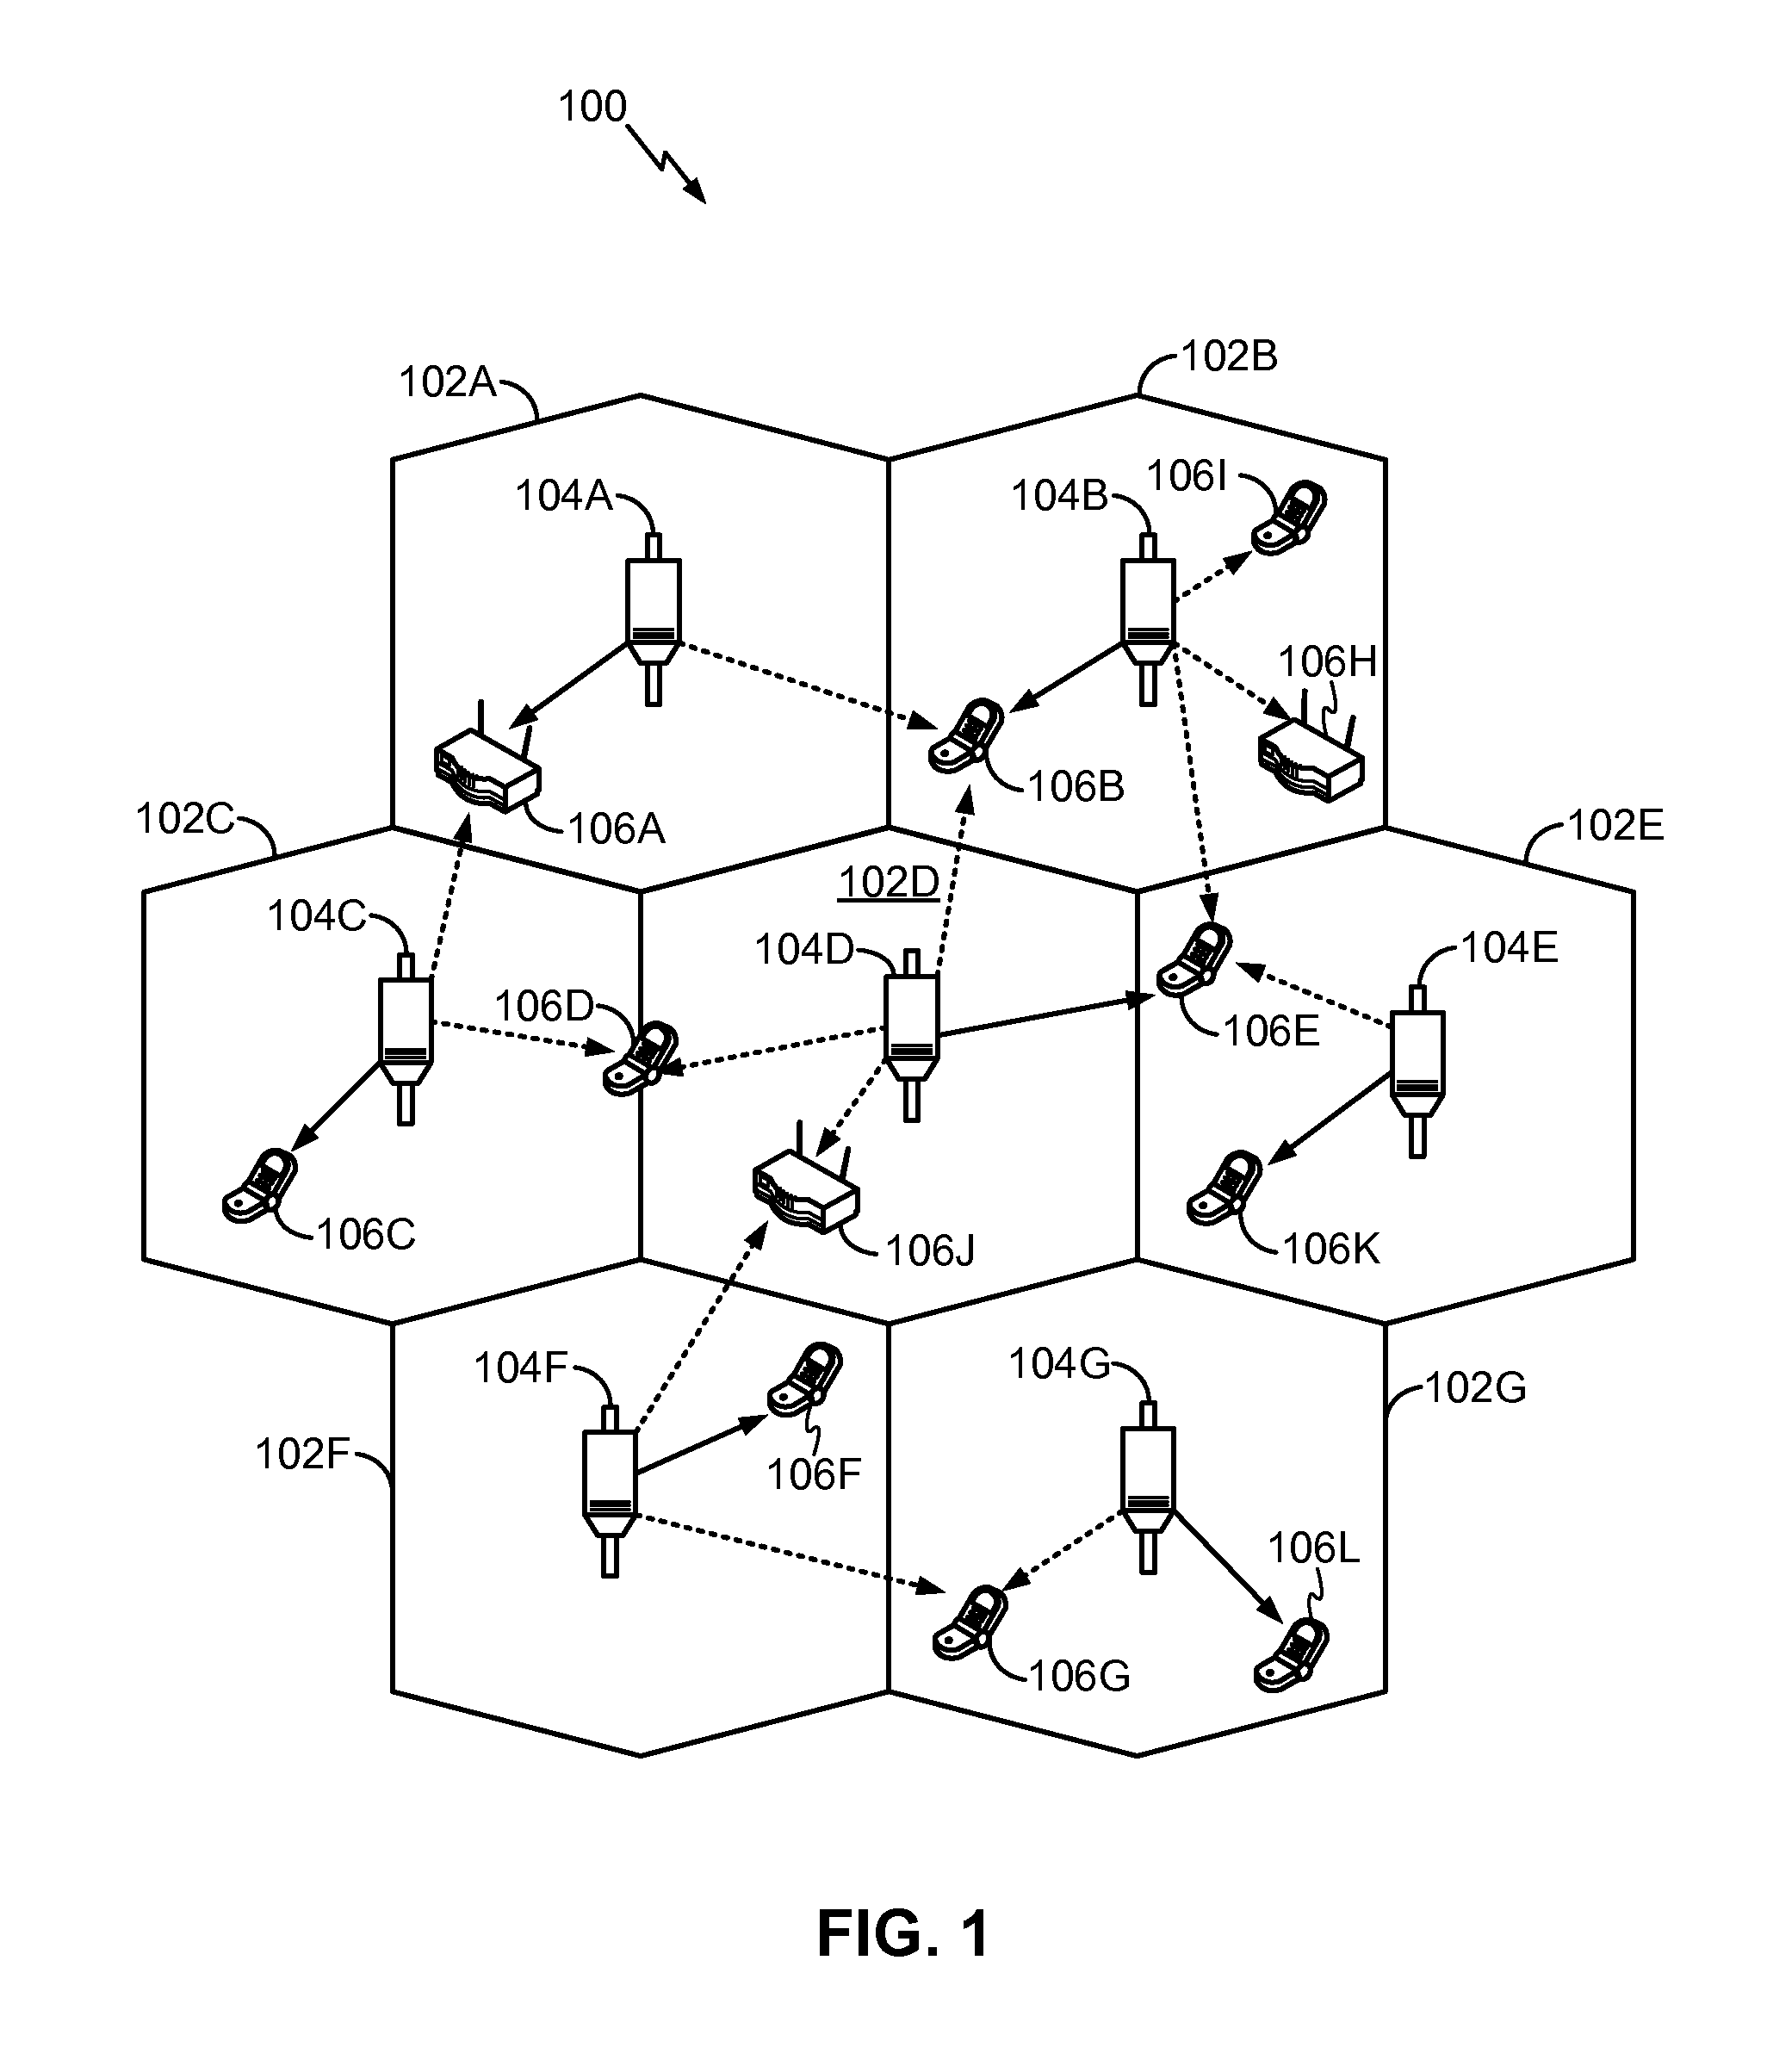 Channel selection to reduce interference to a wireless local area network from a cellular network